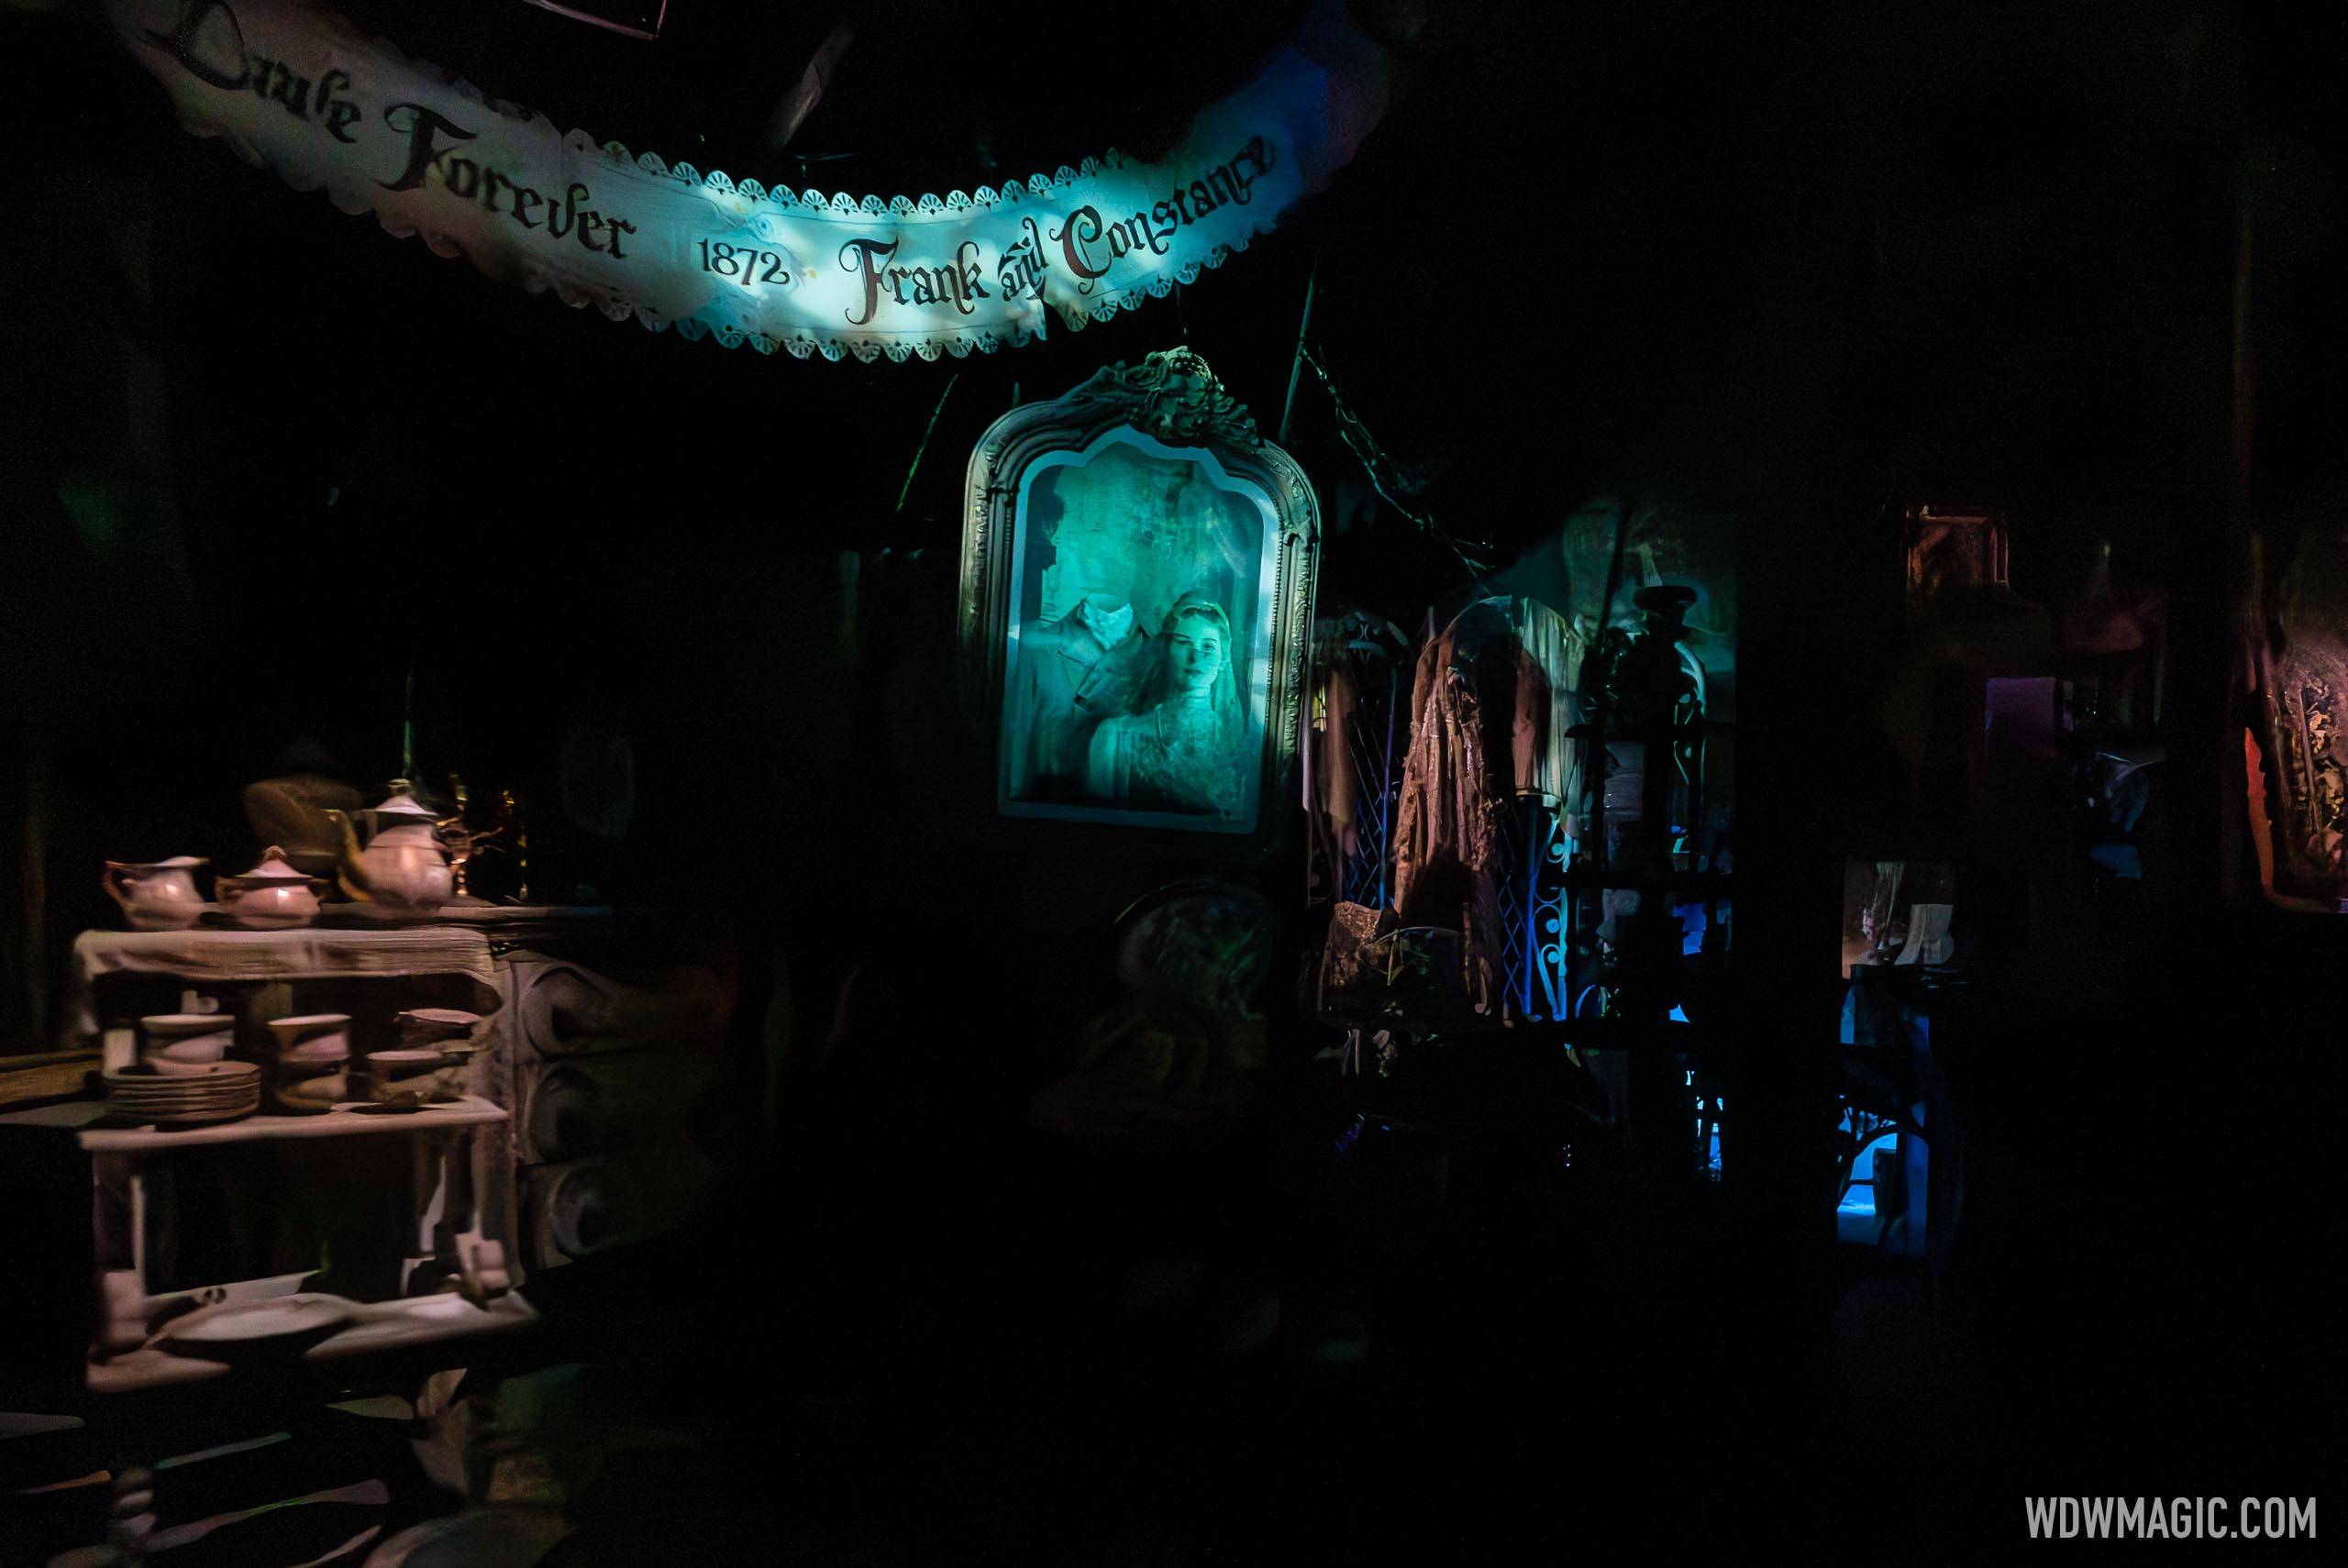 VIDEO - Unboxing the Haunted Mansion Ghost Relations Department Ghost Post